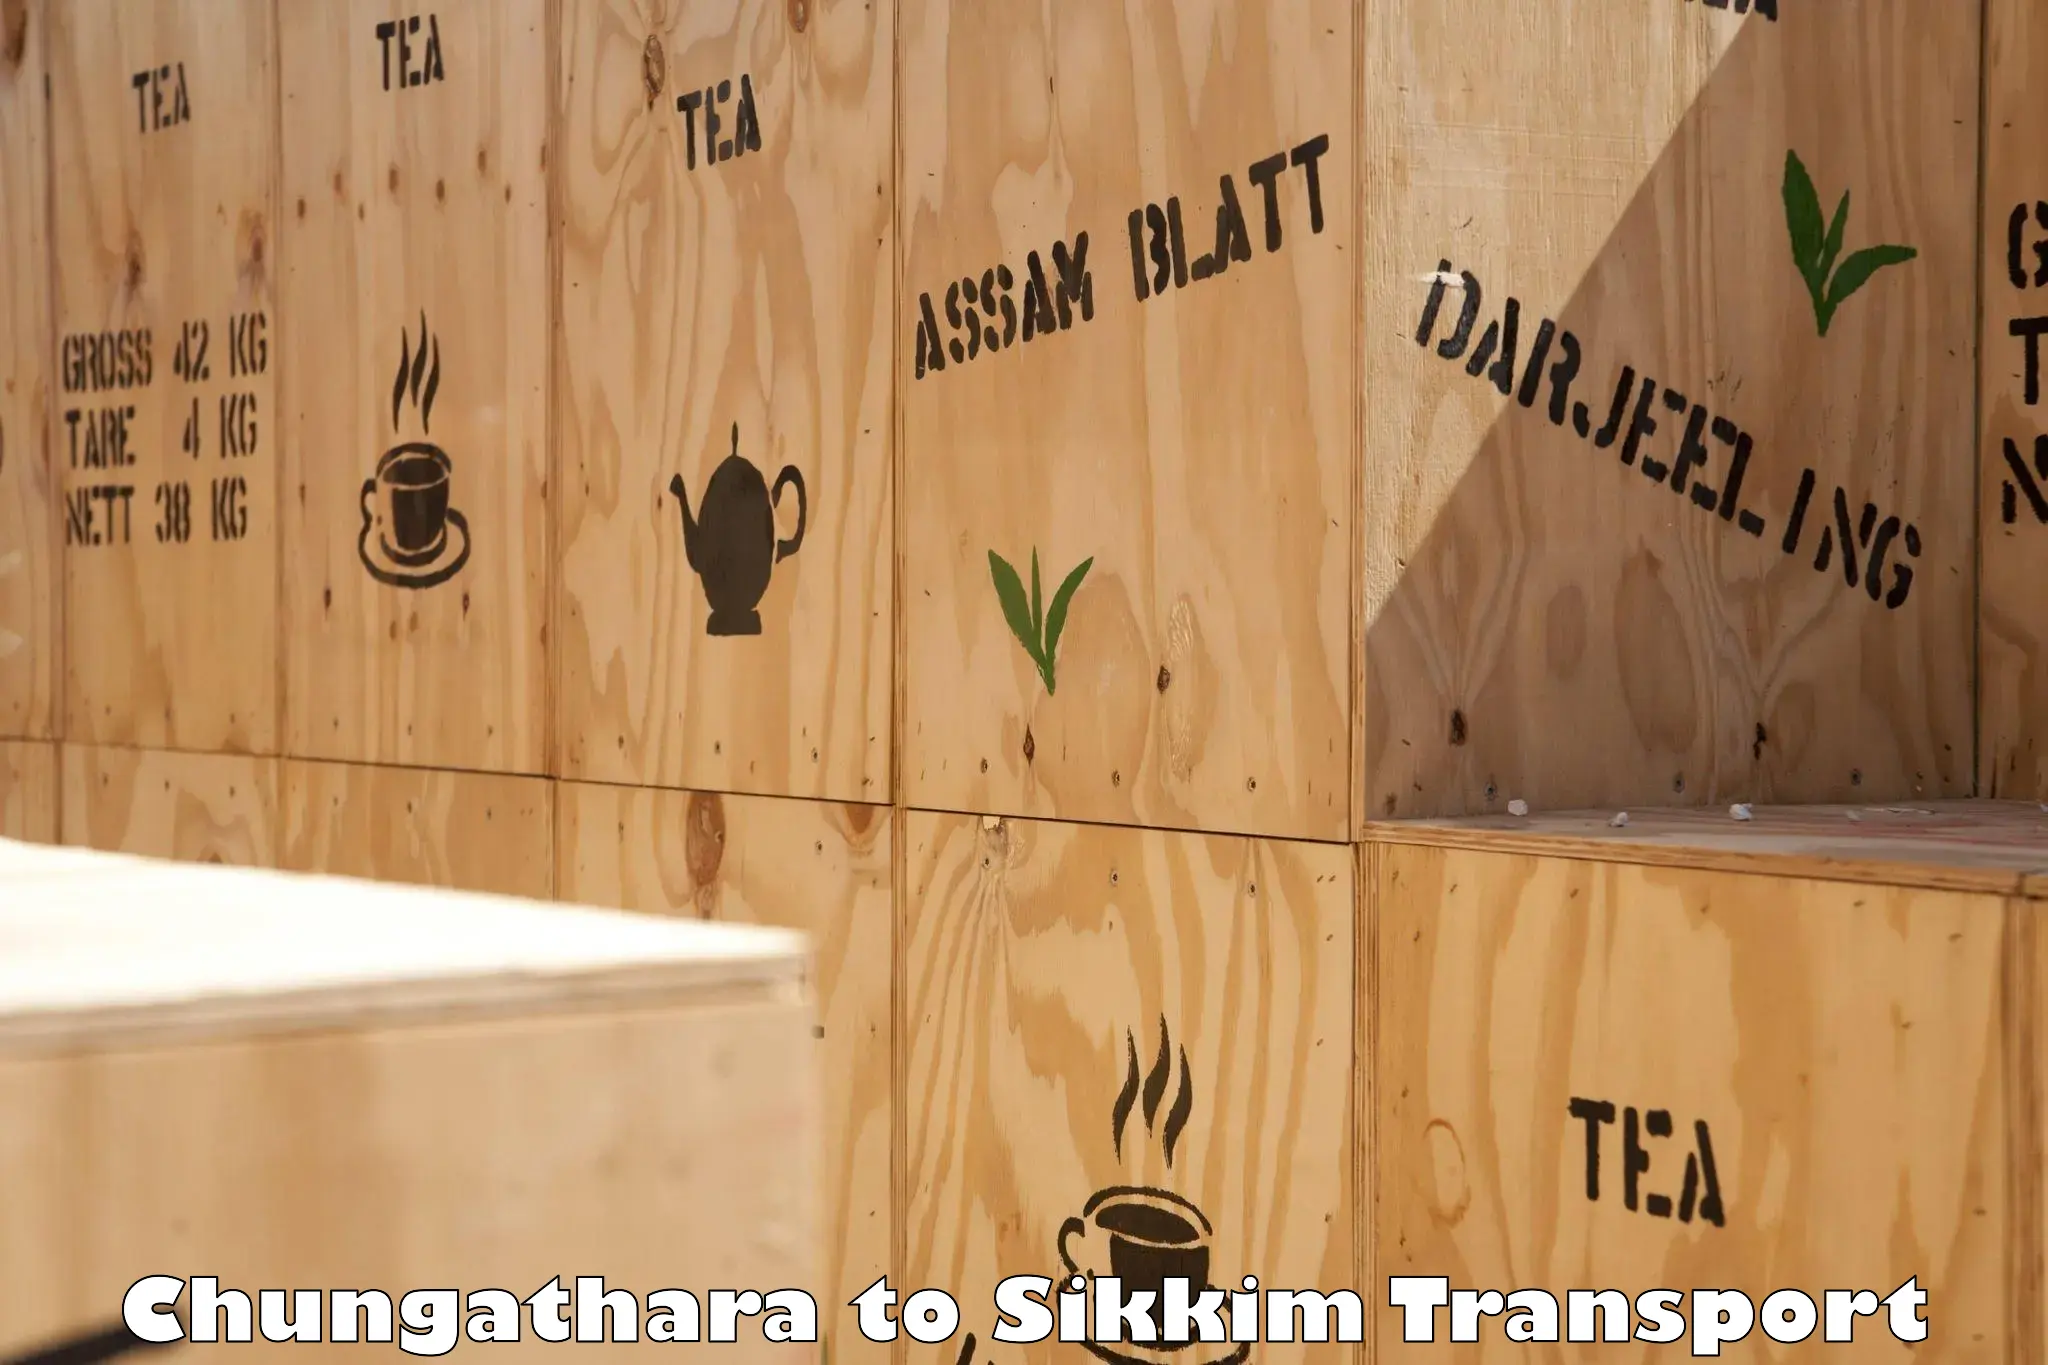 Container transportation services in Chungathara to Rangpo